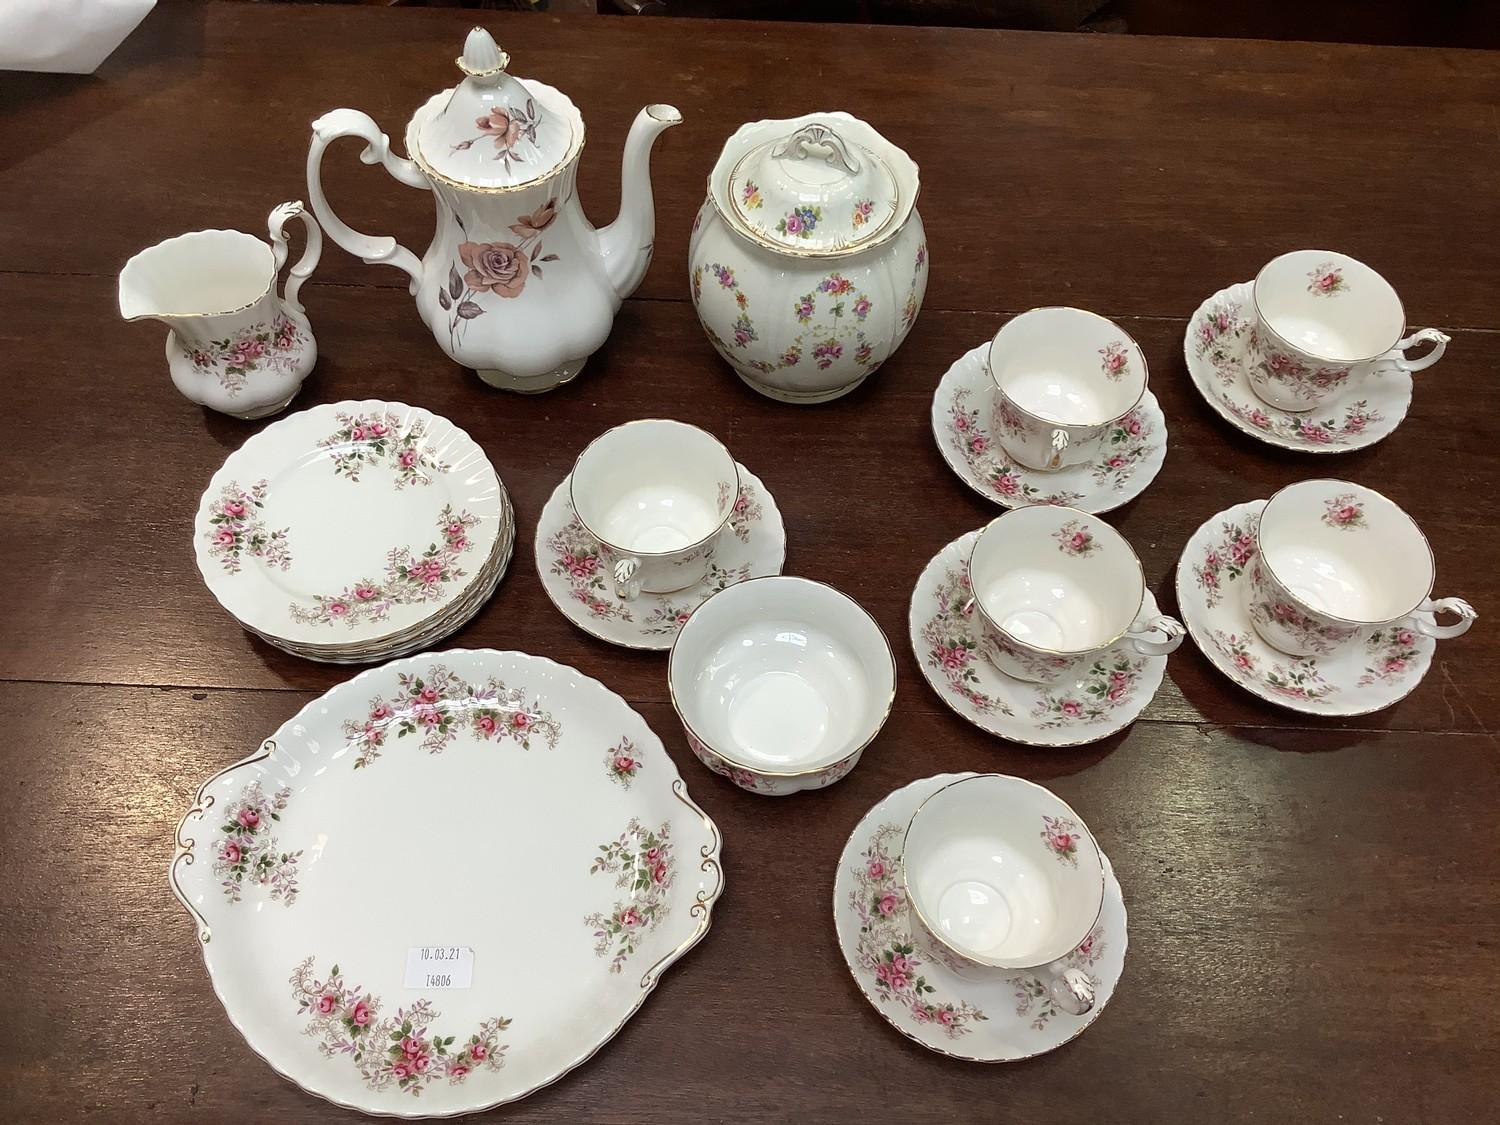 SECTION 4. Royal Albert bone China Lavender Rose tea set comprising of 6 cups and saucers, 6 small